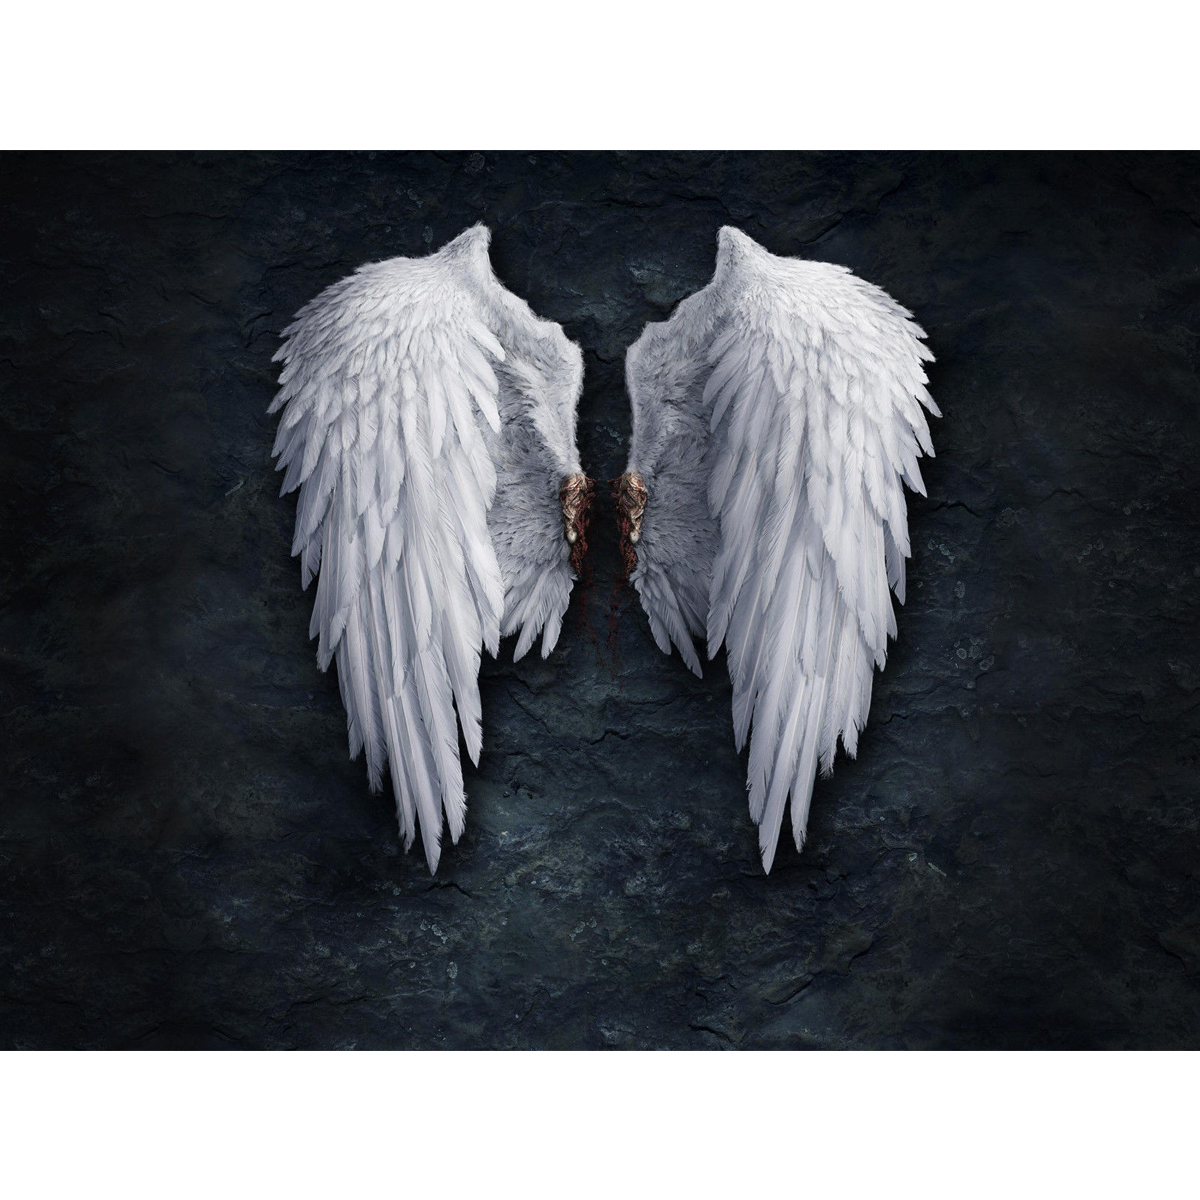 1Pc-Wall-Decorative-Painting-Angel-Wings-Canvas-Print-Wall-Decor-Art-Pictures-Frameless-Wall-Hanging-1725089-1